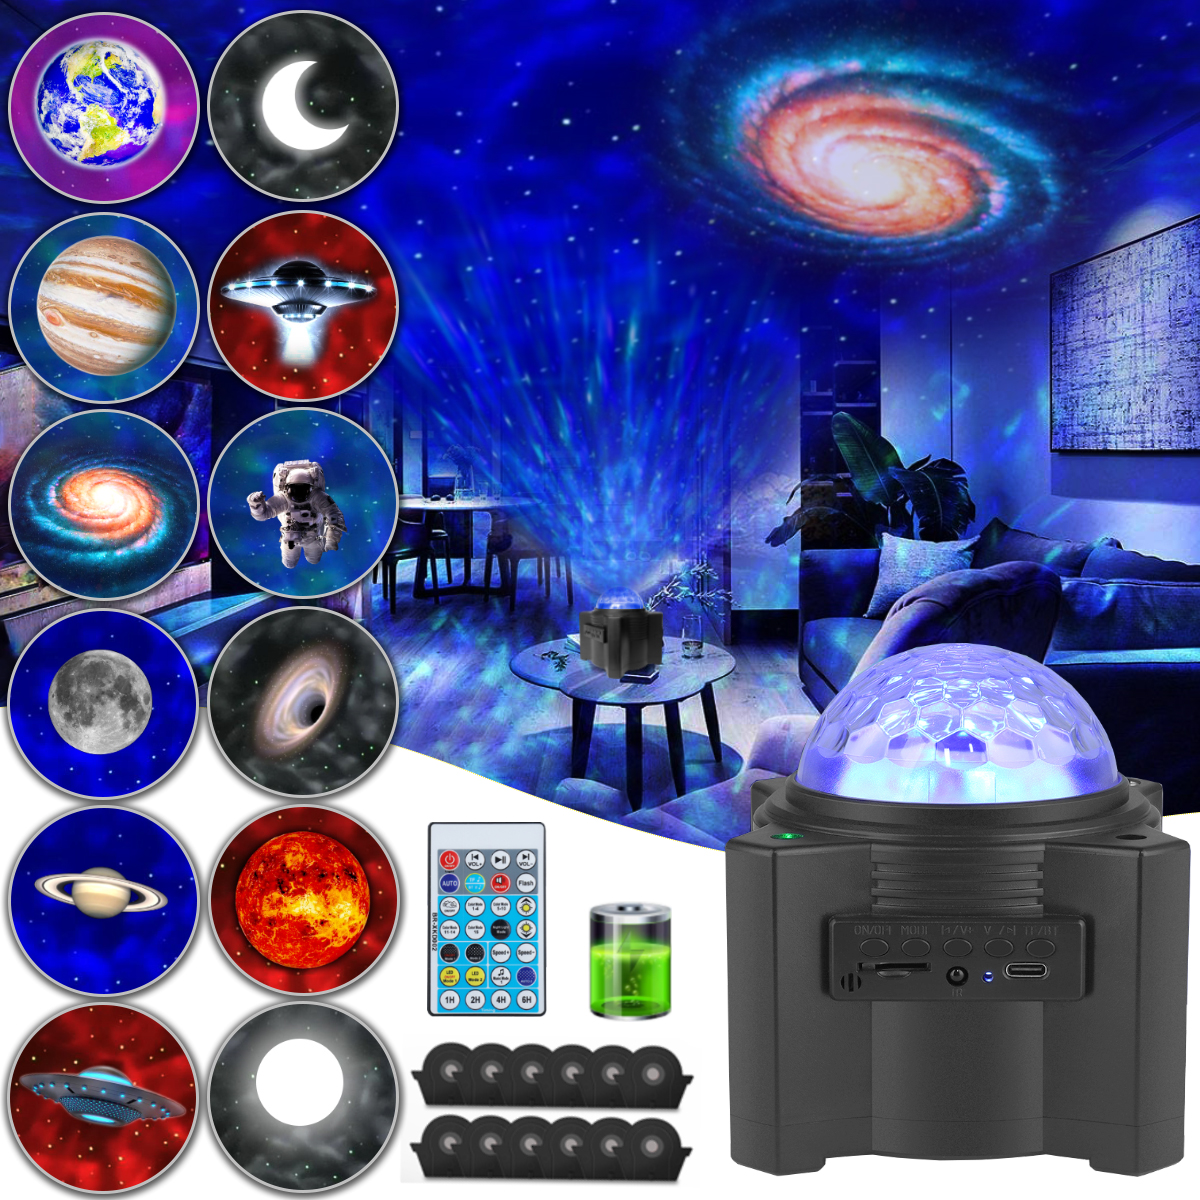 LED-Galaxy-Projector-Nebula-Night-Light-Mood-Lamp-with-Remote-with-Bluetooth-Speaker-for-Kids-and-Ad-1907929-2